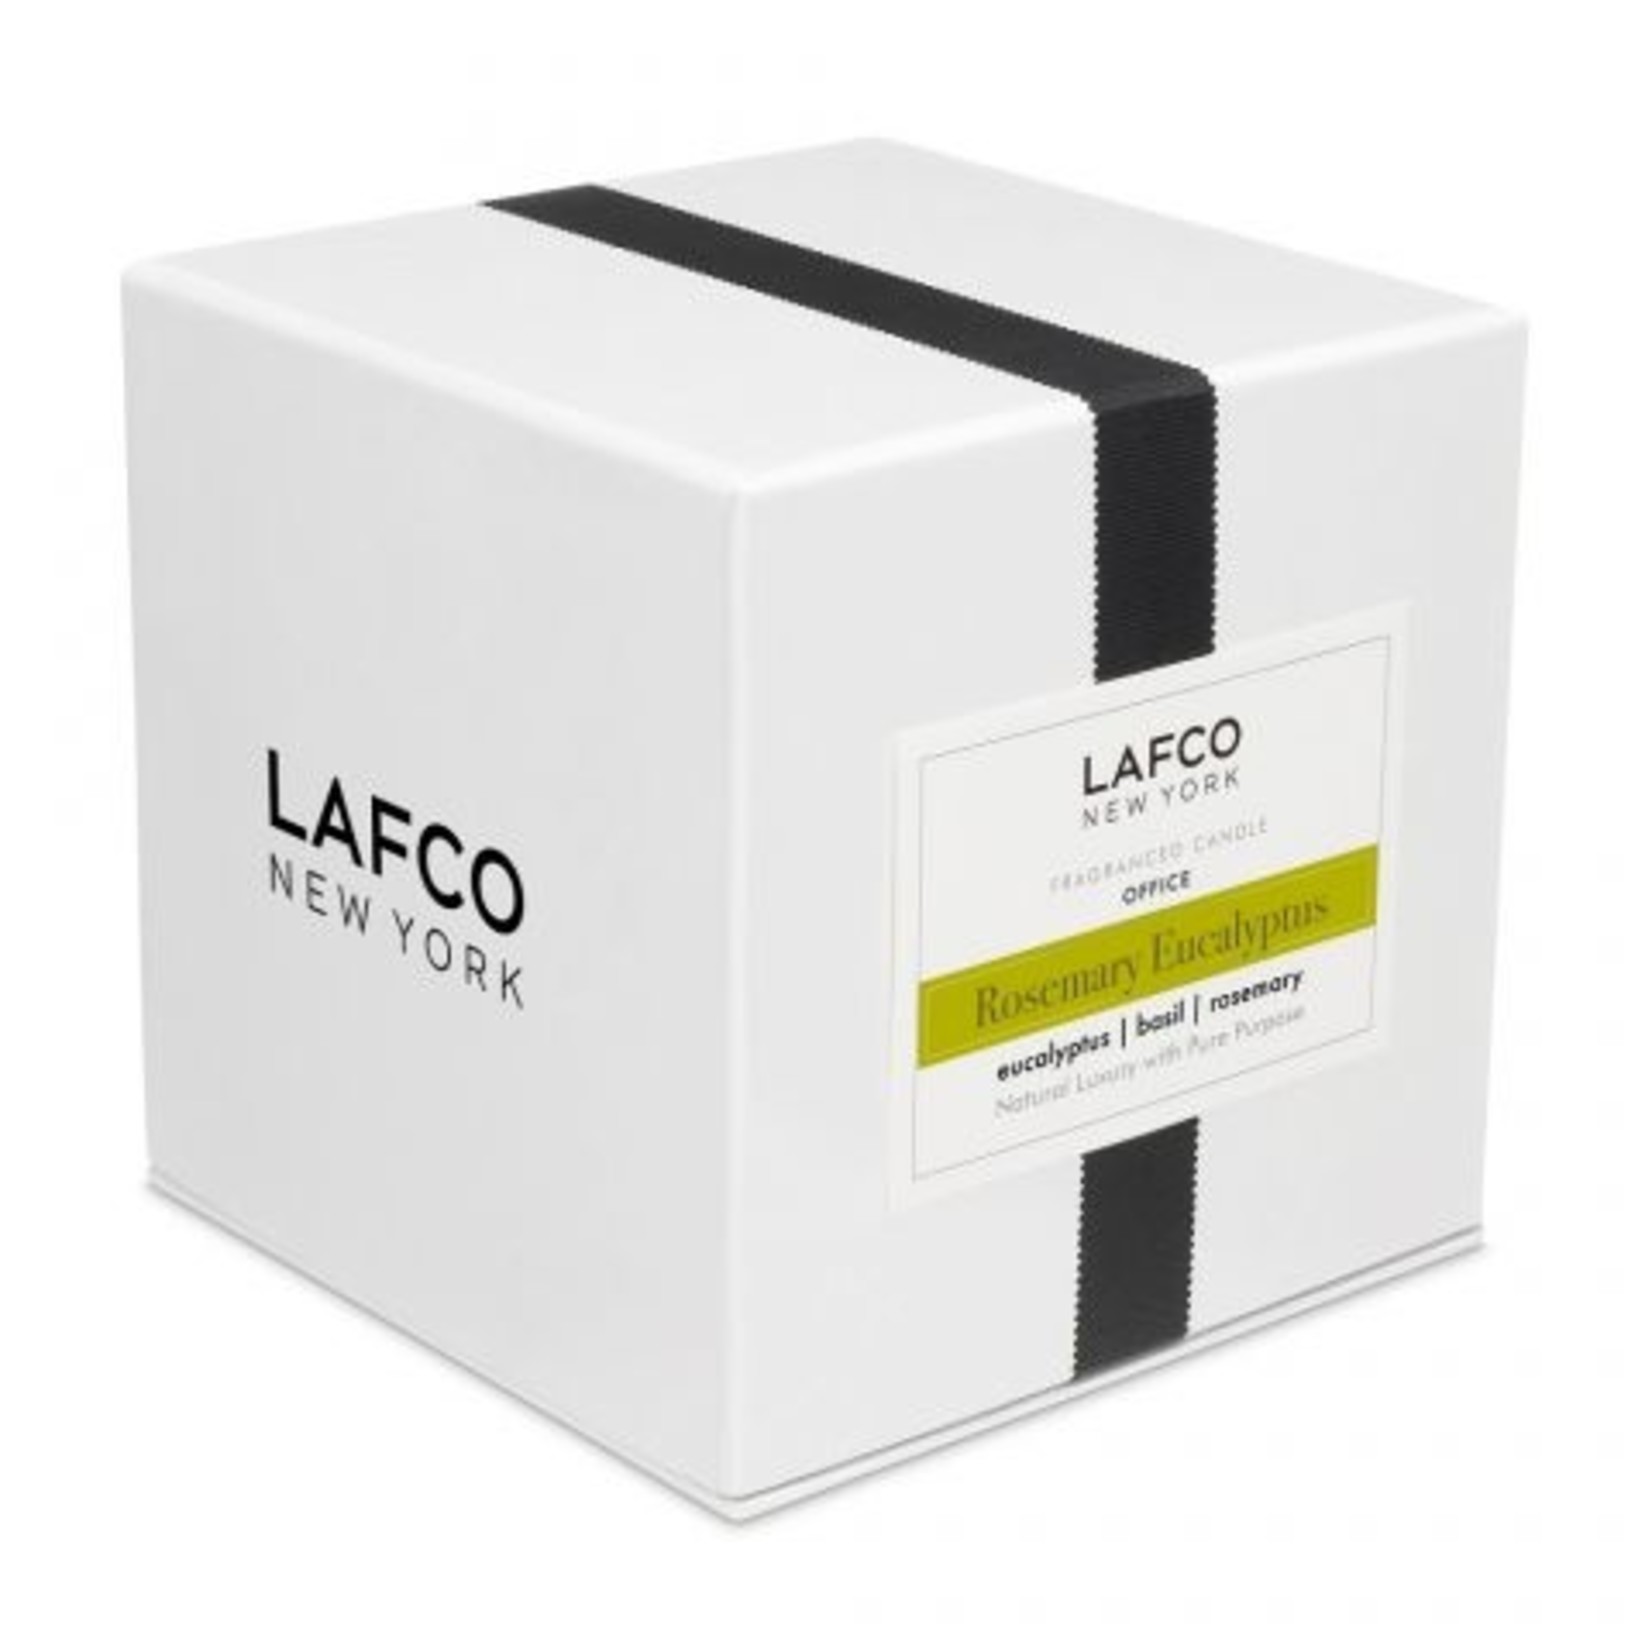 LAFCO LAFCO Office - Classic Candle Rosemary Eucalyptus (6.5)